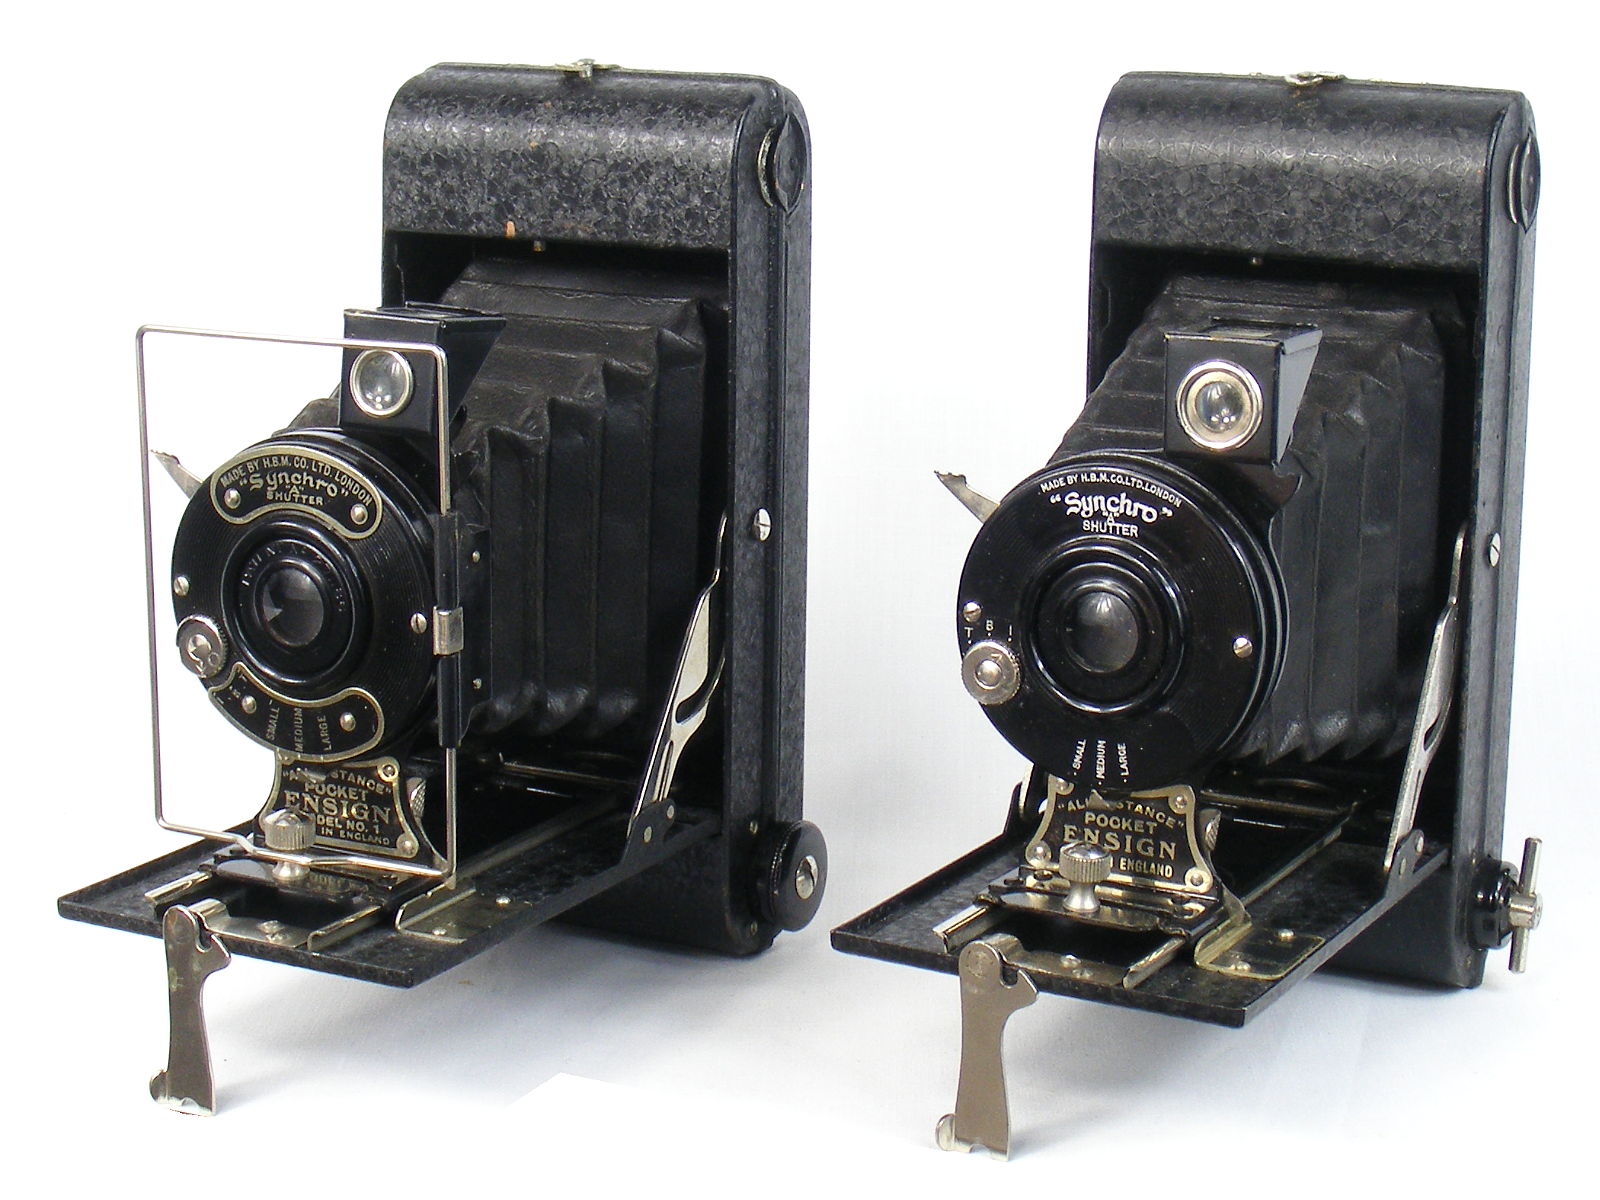 Image of All Distance Pocket Ensign Folding Camera (earl;y and late black variants)